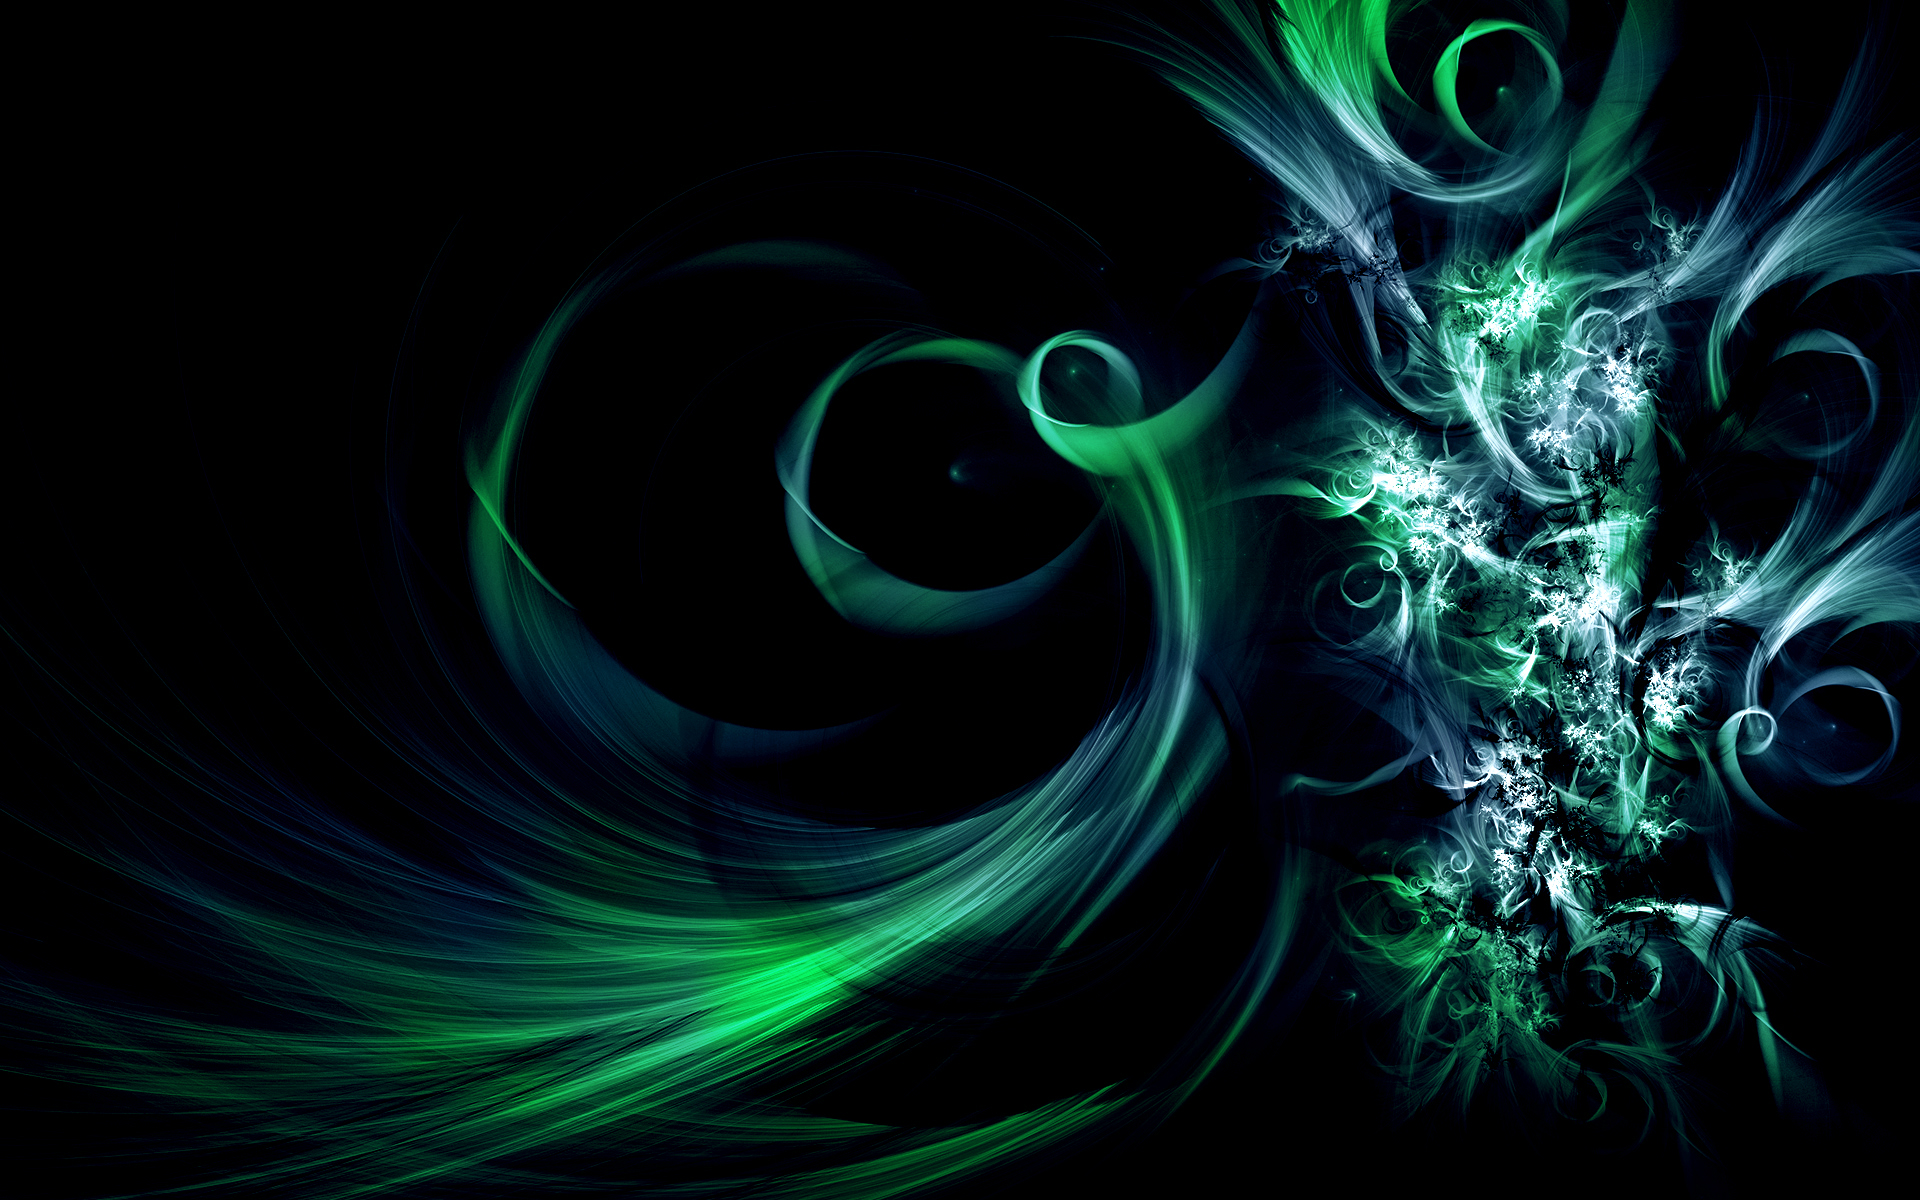 abstract, fractal, cool High Definition image